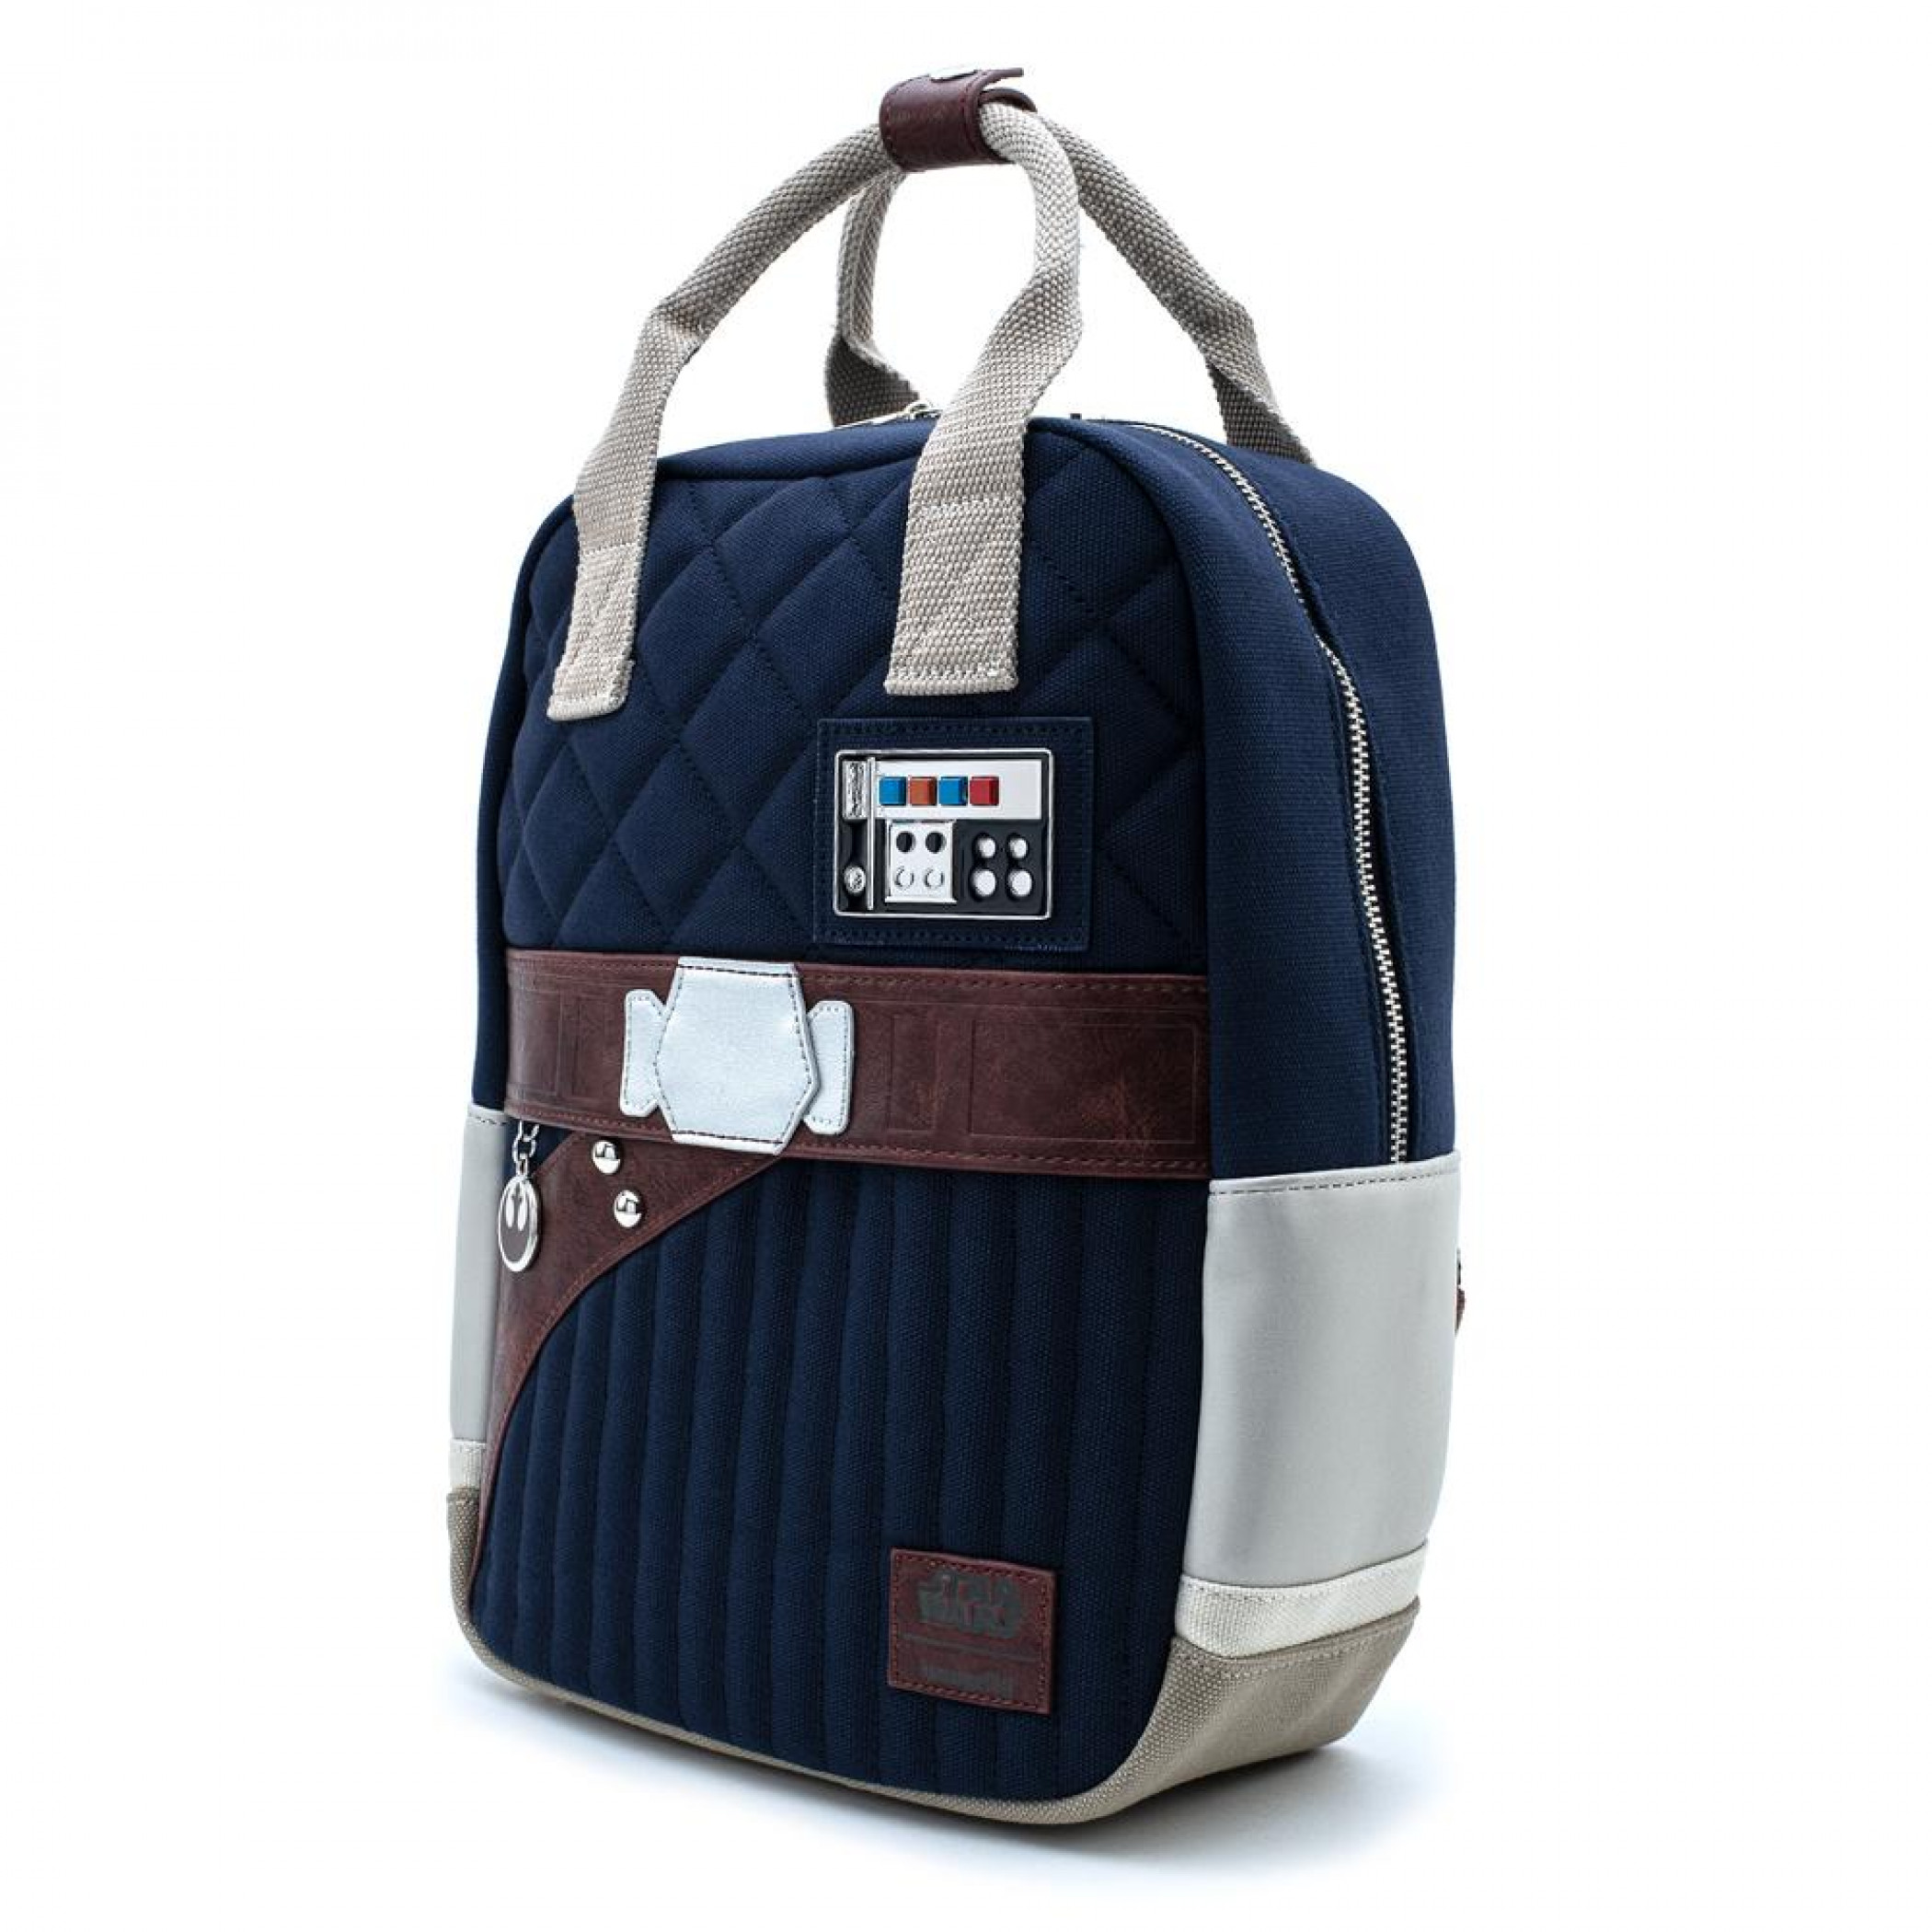 Star Wars Empire 40th Han Solo Hoth Outfit Mini Backpack by Loungefly